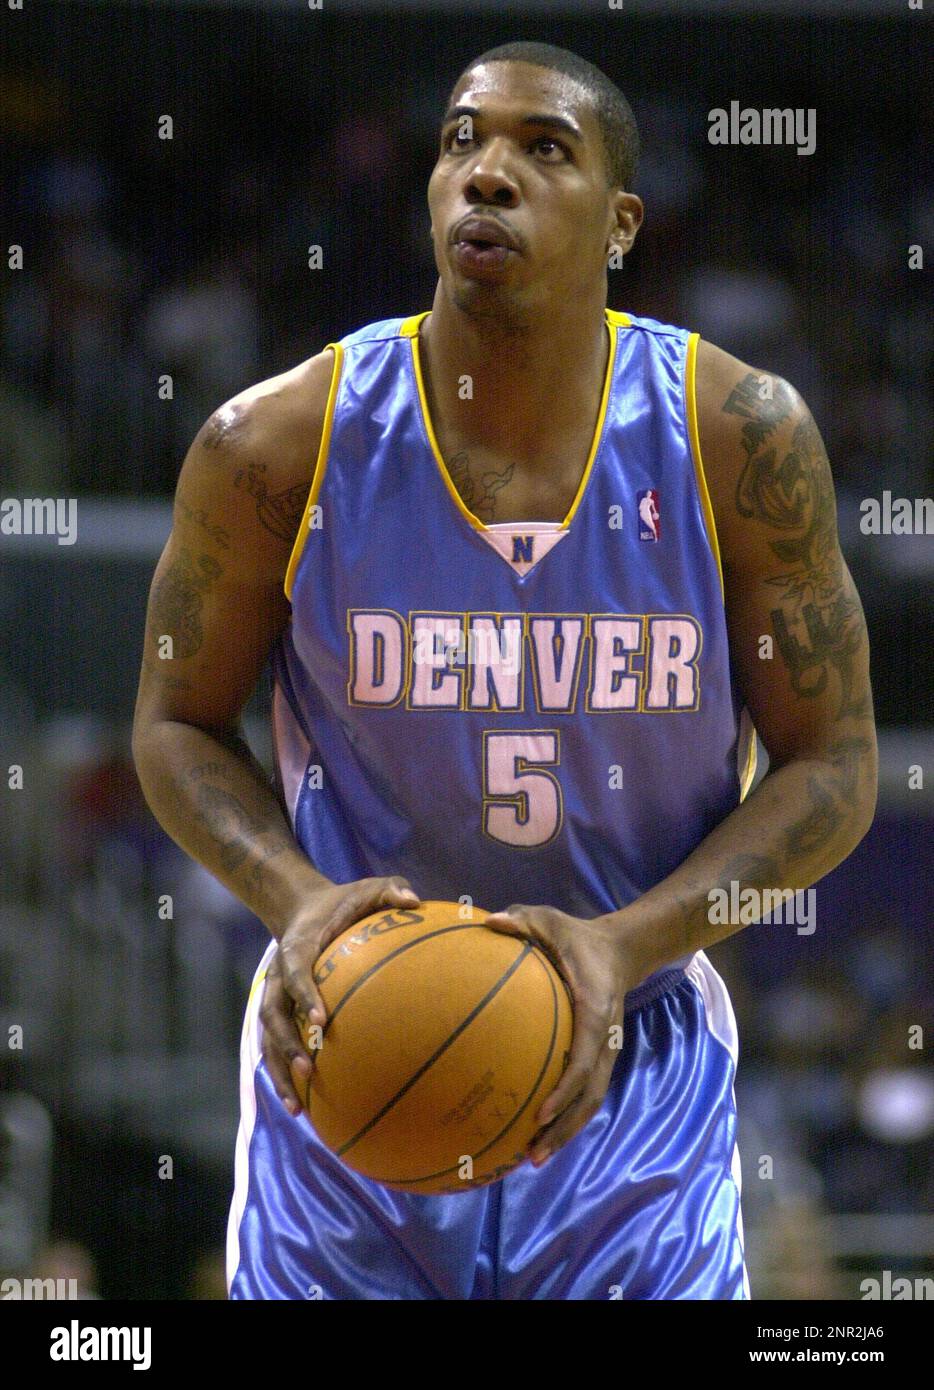 Rodney White of the Denver Nuggets during 120-104 loss to the Los Angeles Clippers at the Staples Center during an NBA basketball game on Thursday, Dec. 31, 2003 in Los Angeles. (Kirby Lee via AP) Stock Photo